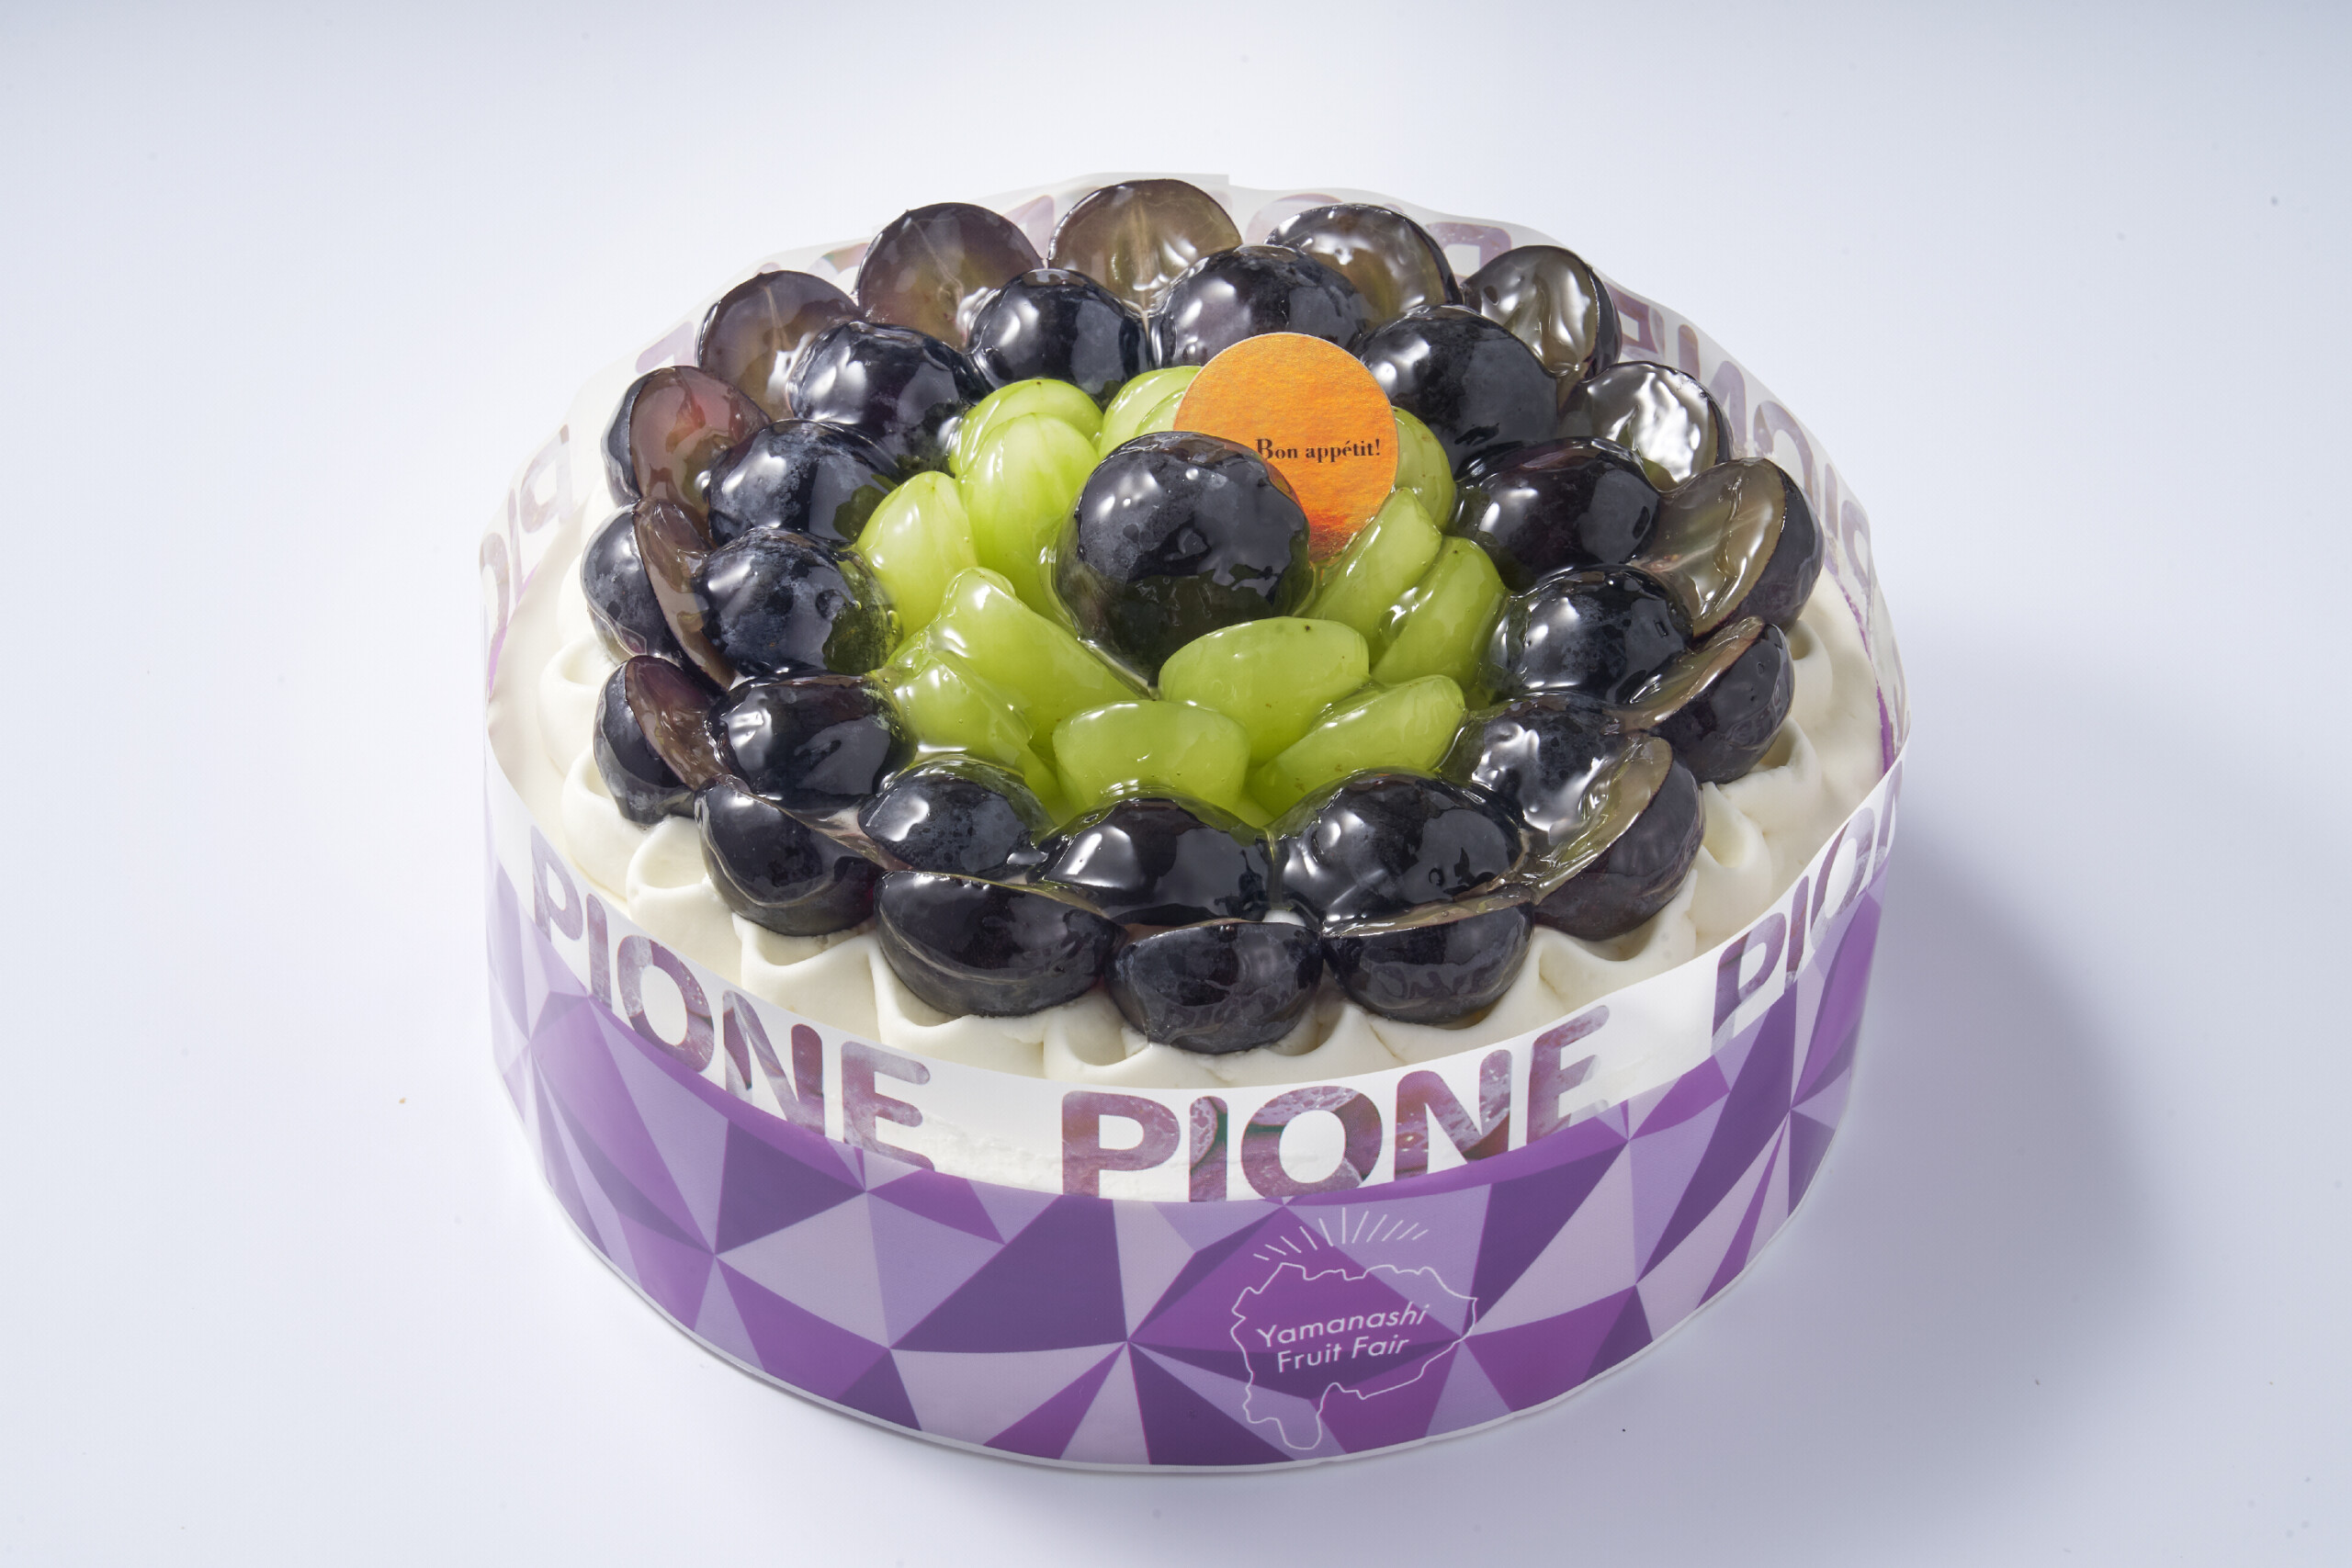 Chateraise—Yamanashi Shine Muscat and Pione Fromage Tart 15cm (image supplied)